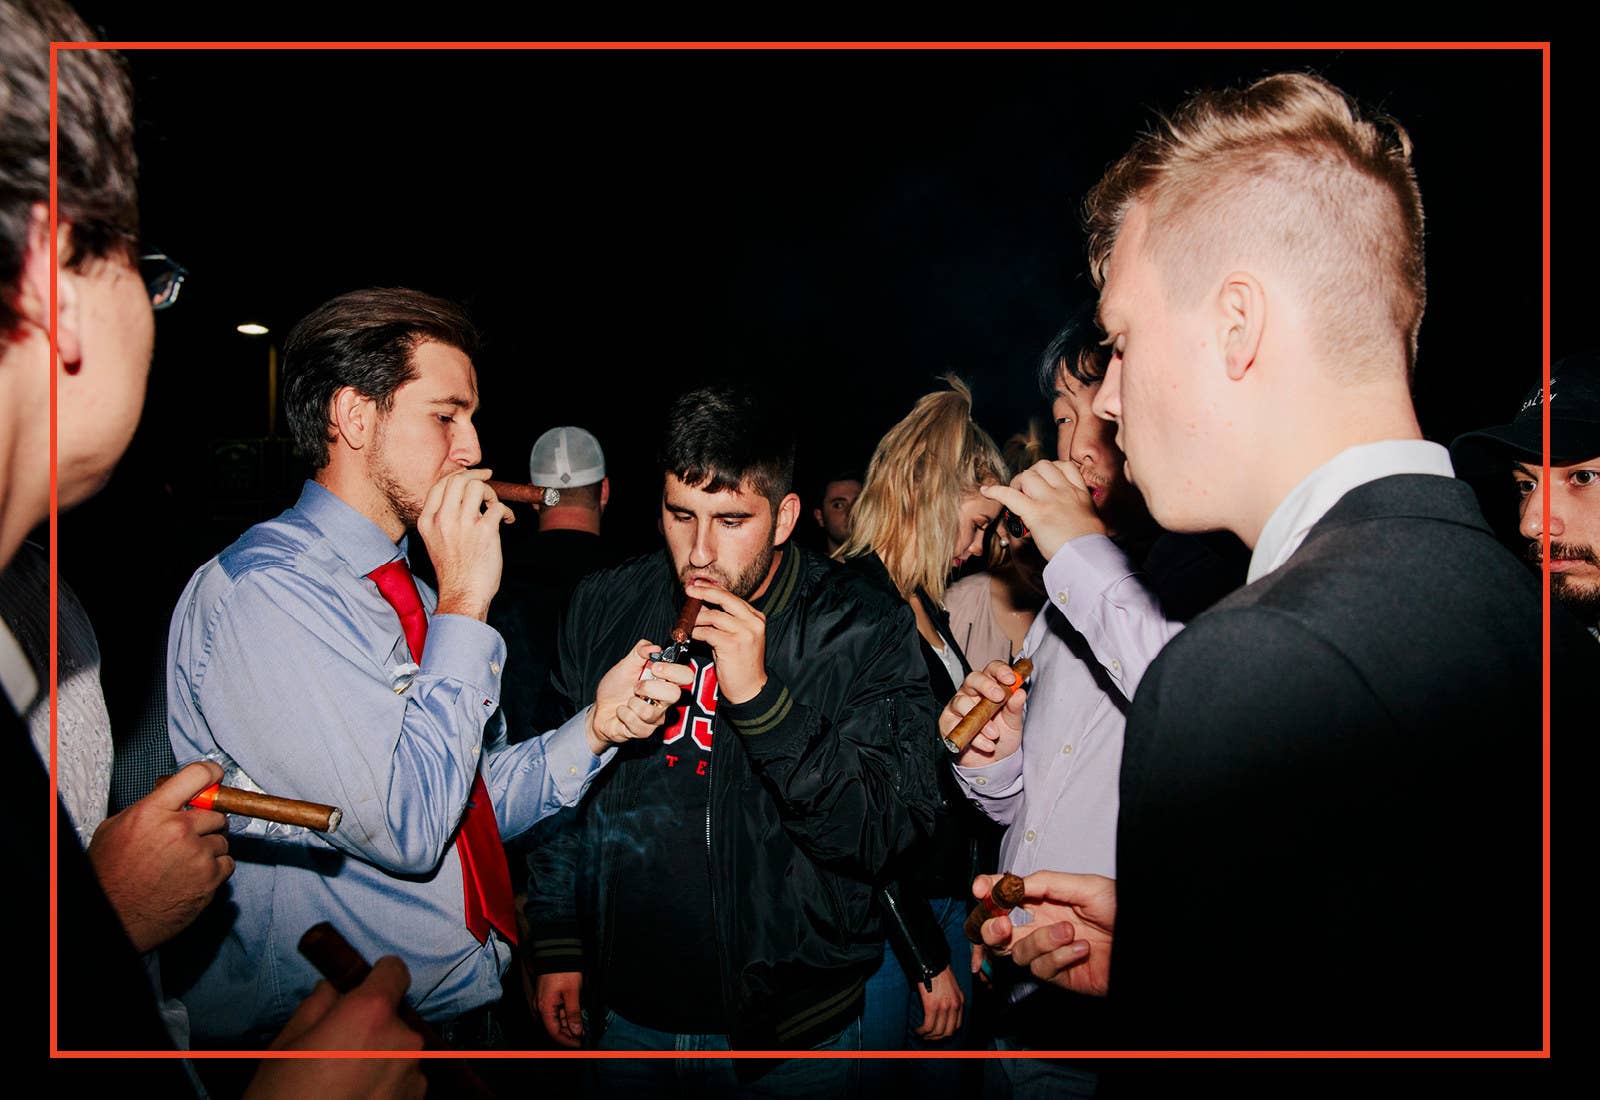 Members of the California College Republicans light and smoke cigars at the cigar social event on the first night of the three-day convention in Santa Barbara, California on April 6, 2018.